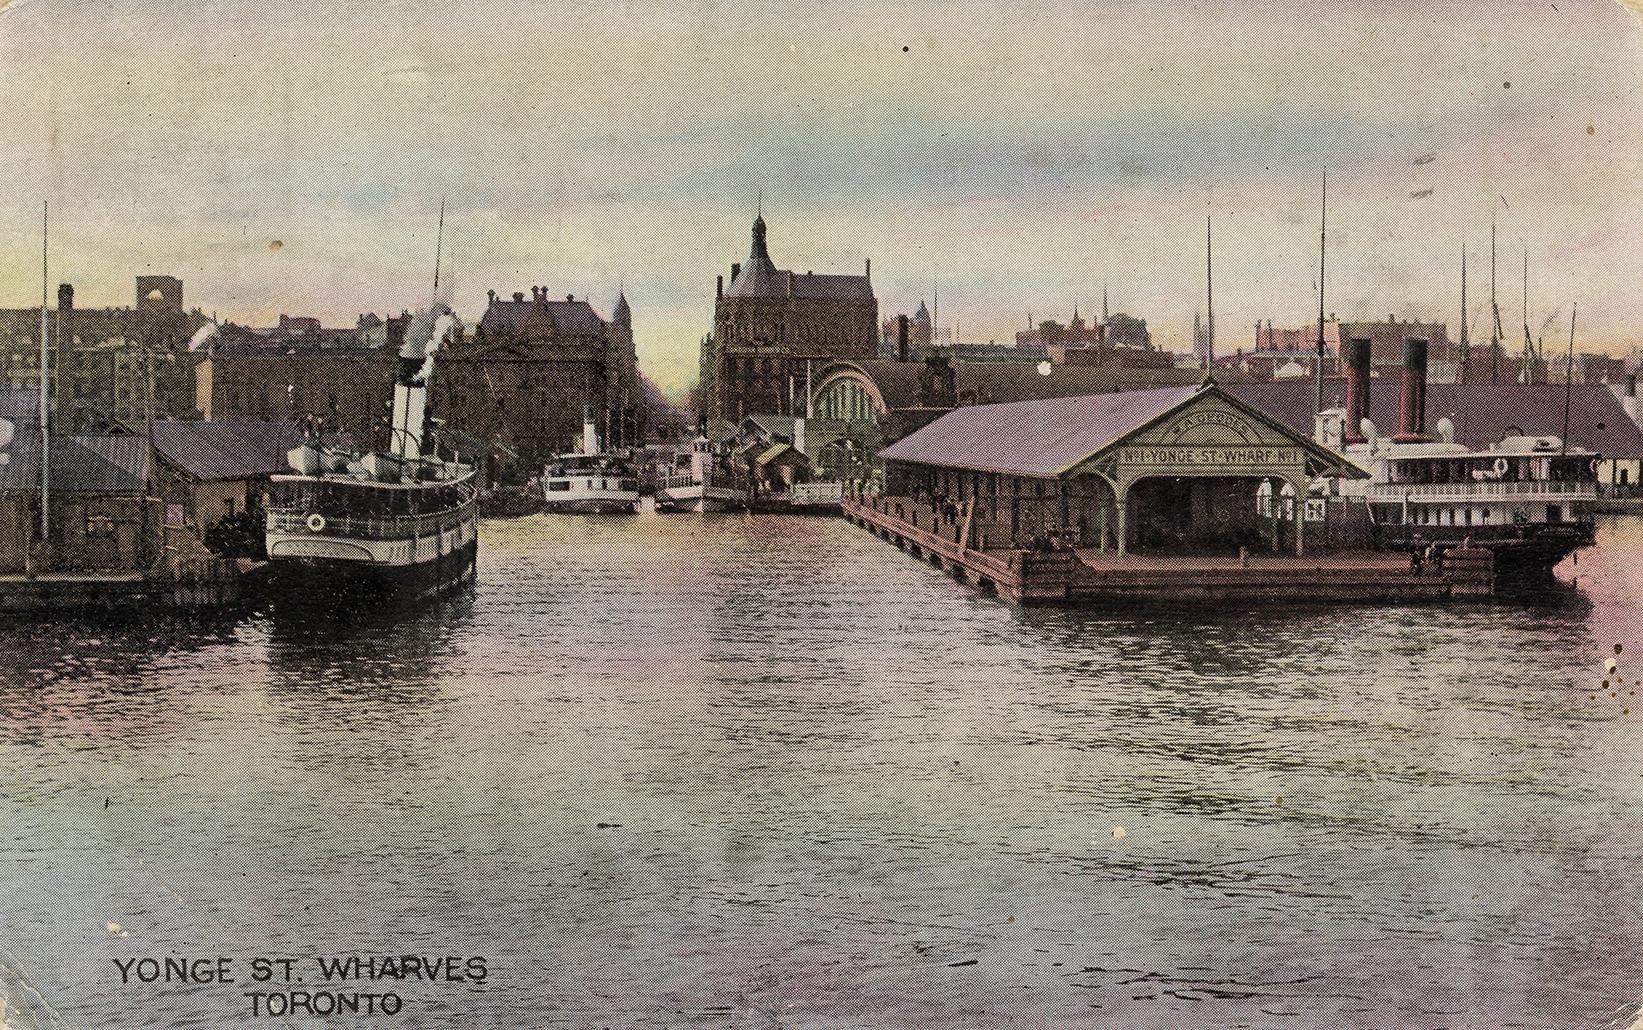 Colorized photograph of busy docks and boats in the water in front of a large city.